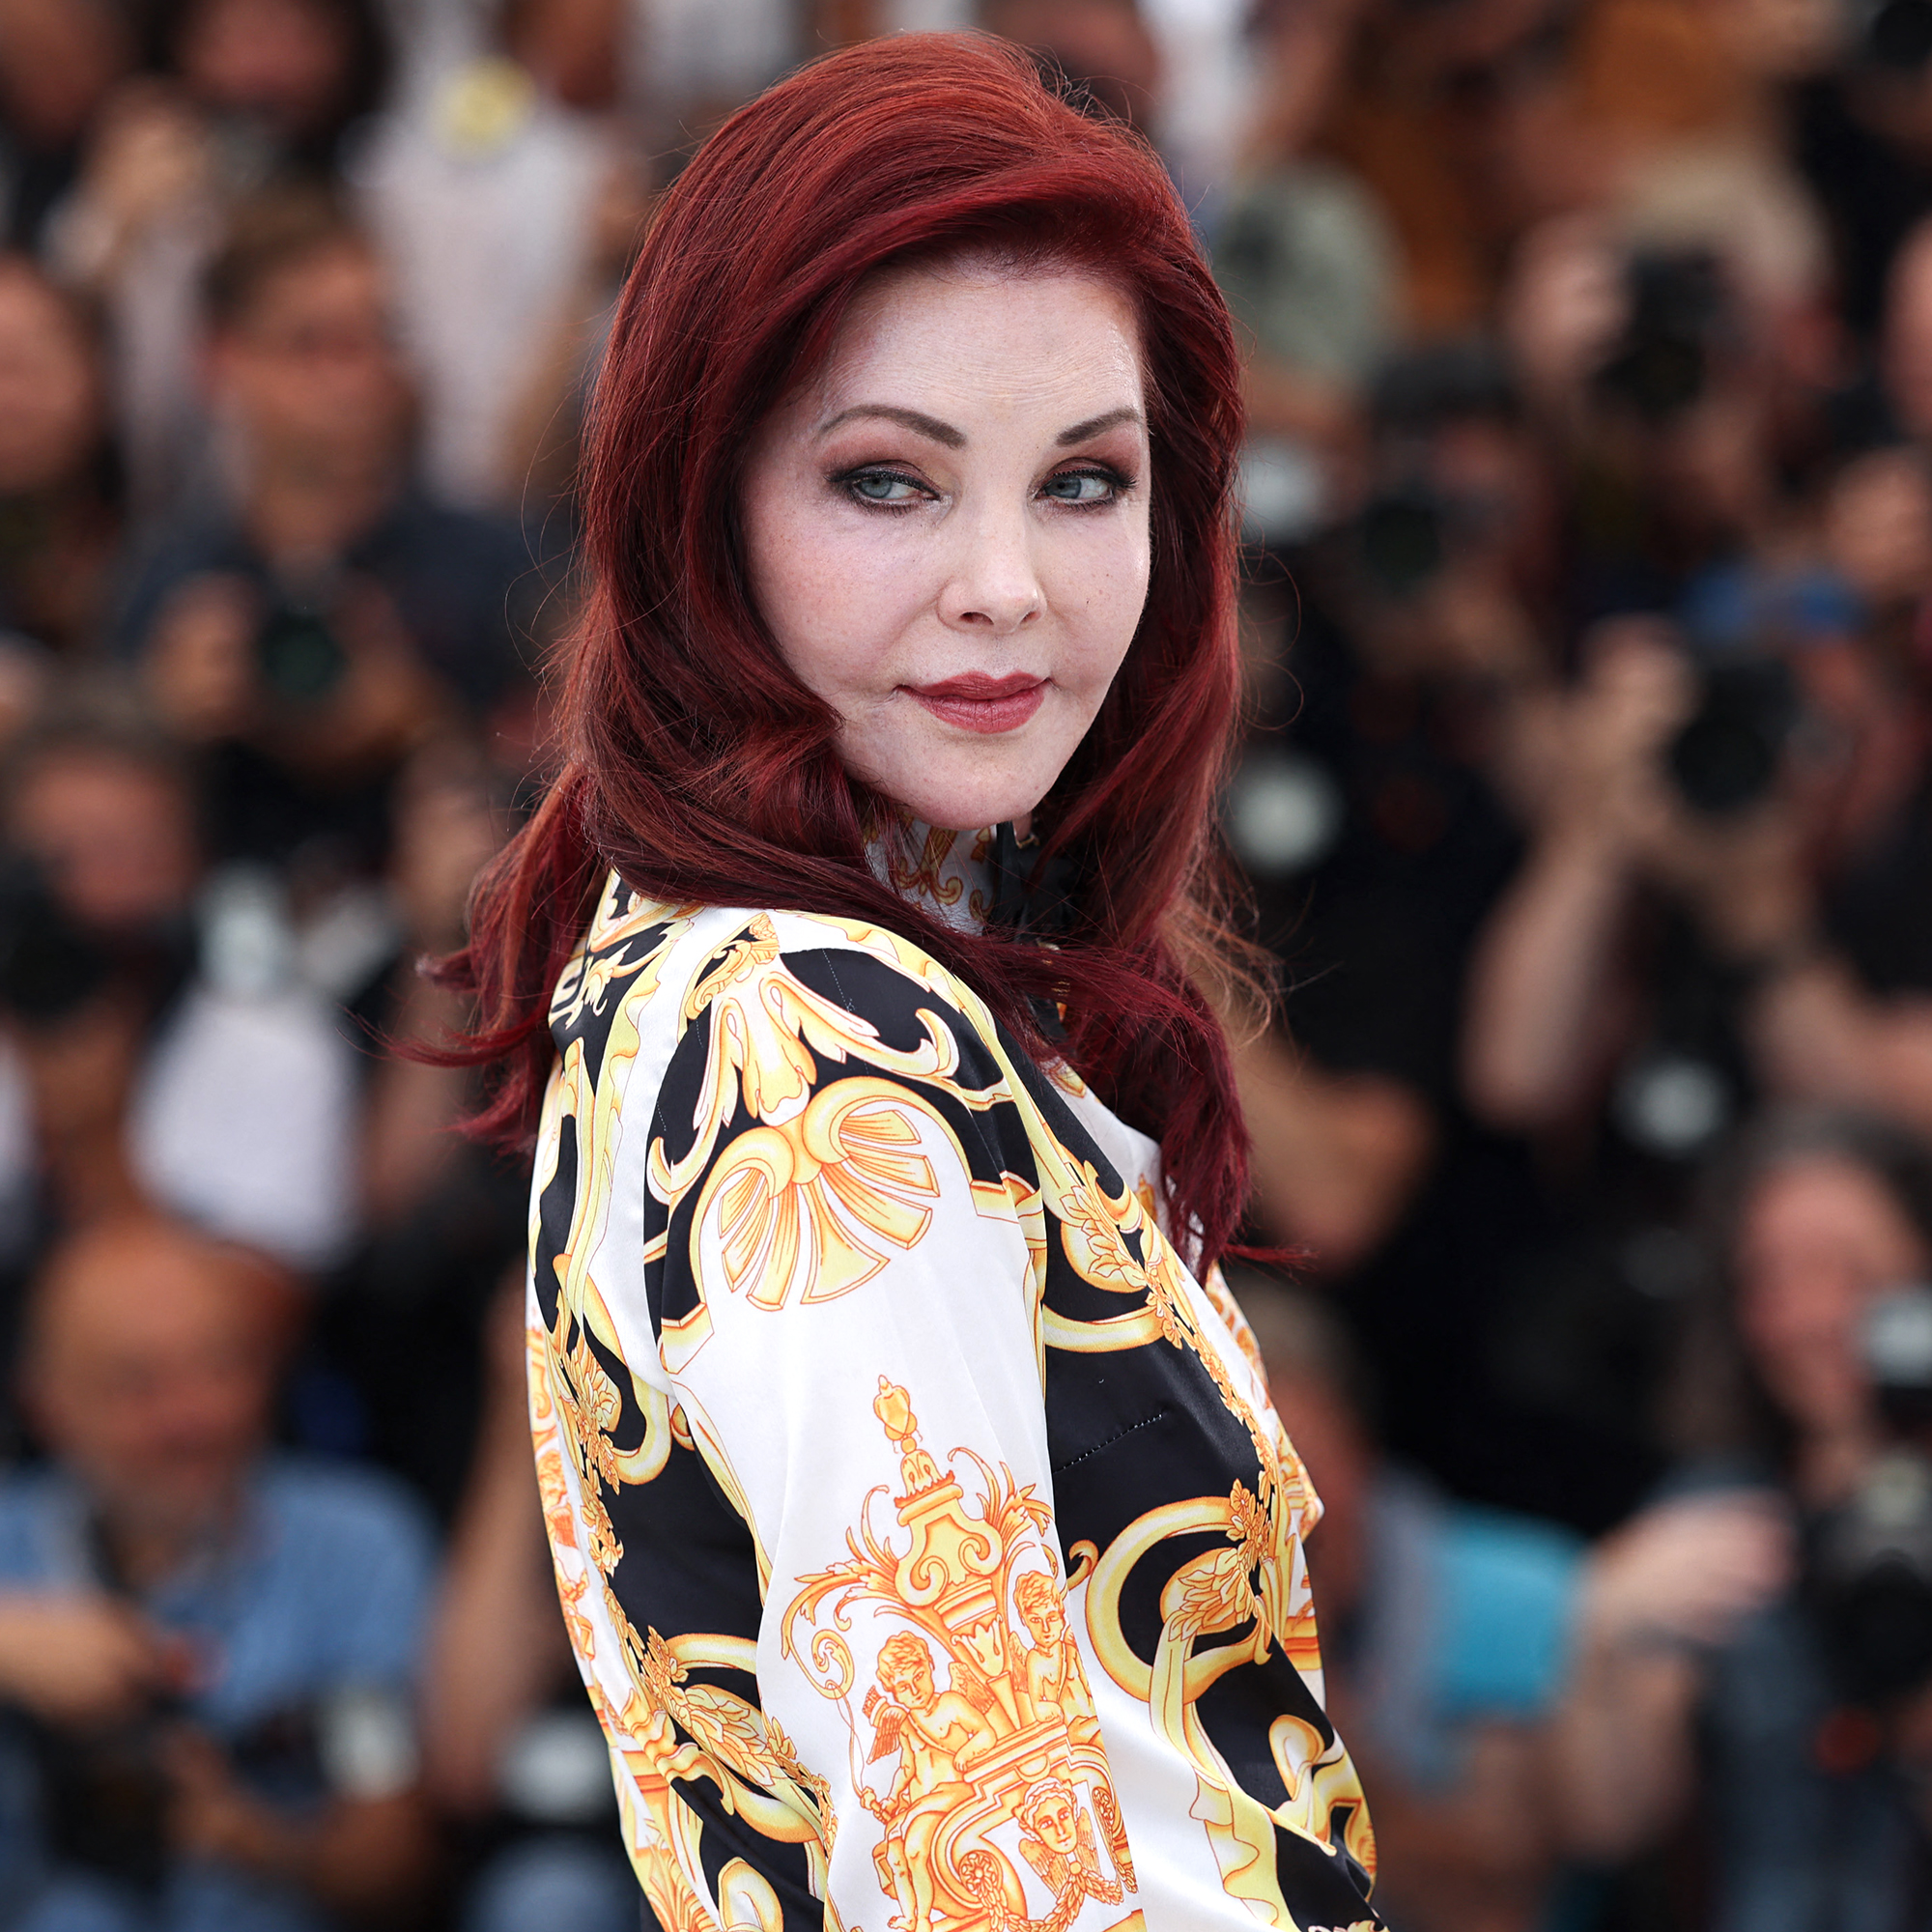 Priscilla Presley Through the Years Marriage to Elvis, More picture photo